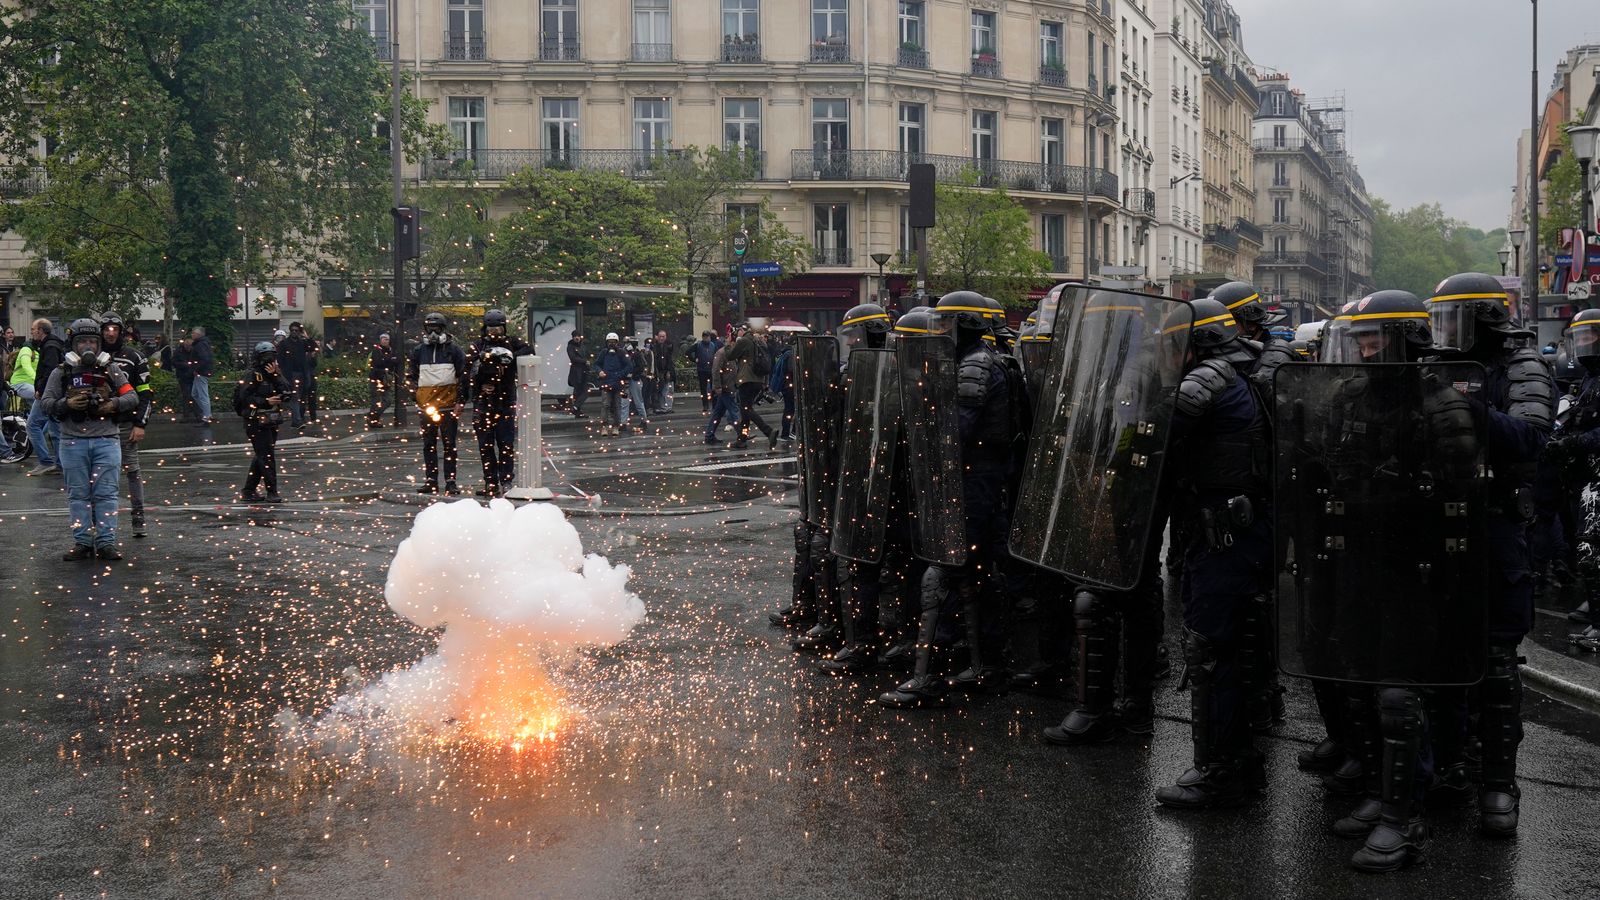 France protests: More than 60 arrested and one police officer injured by Molotov cocktail in May Day clashes